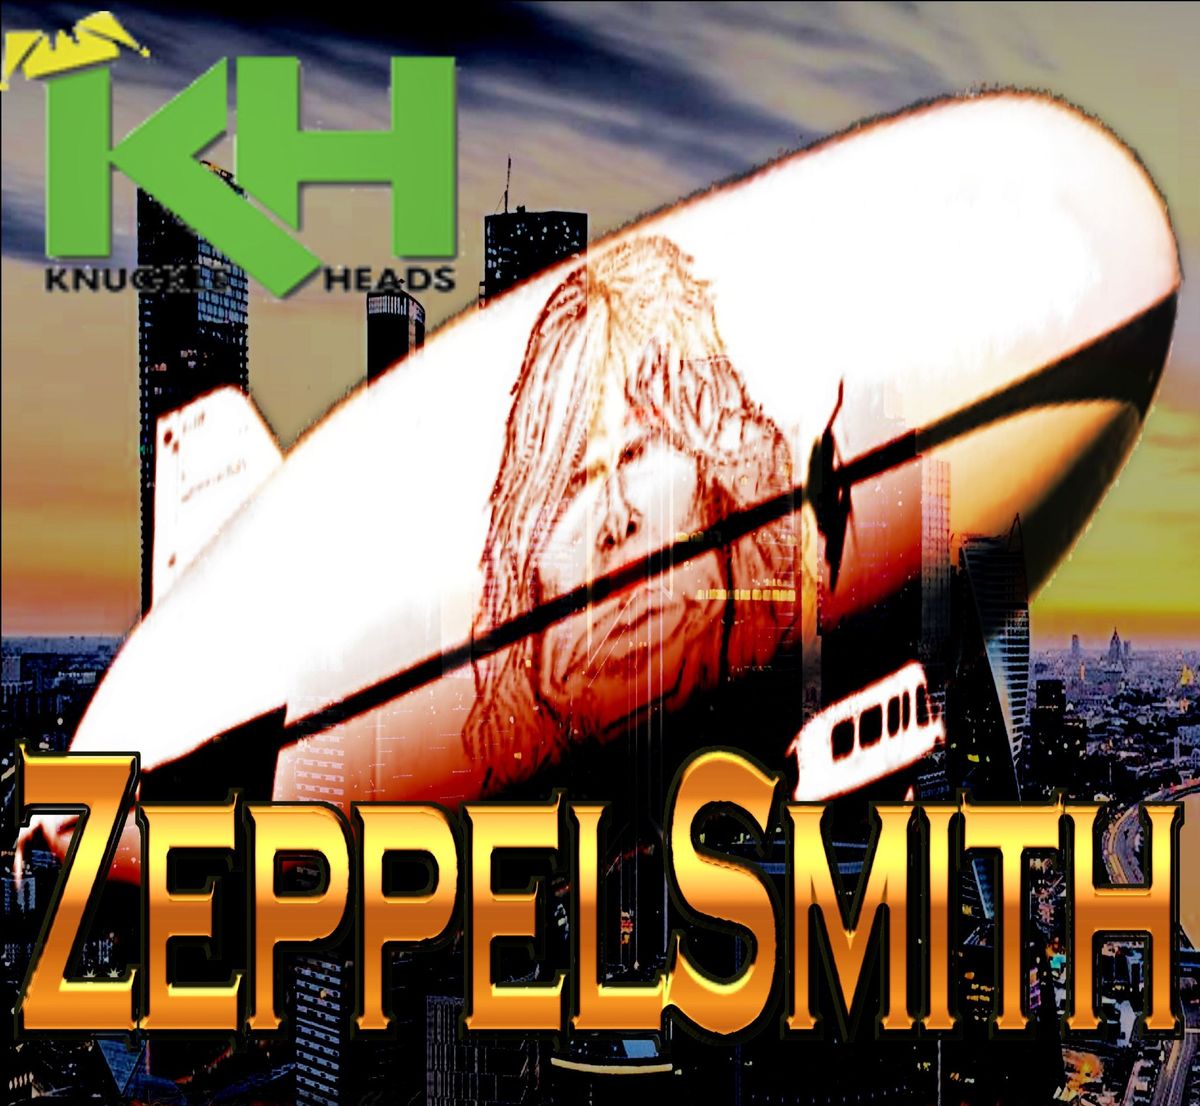 ZeppelSmith Returns to Knuckle heads Bar & Grill June 28th